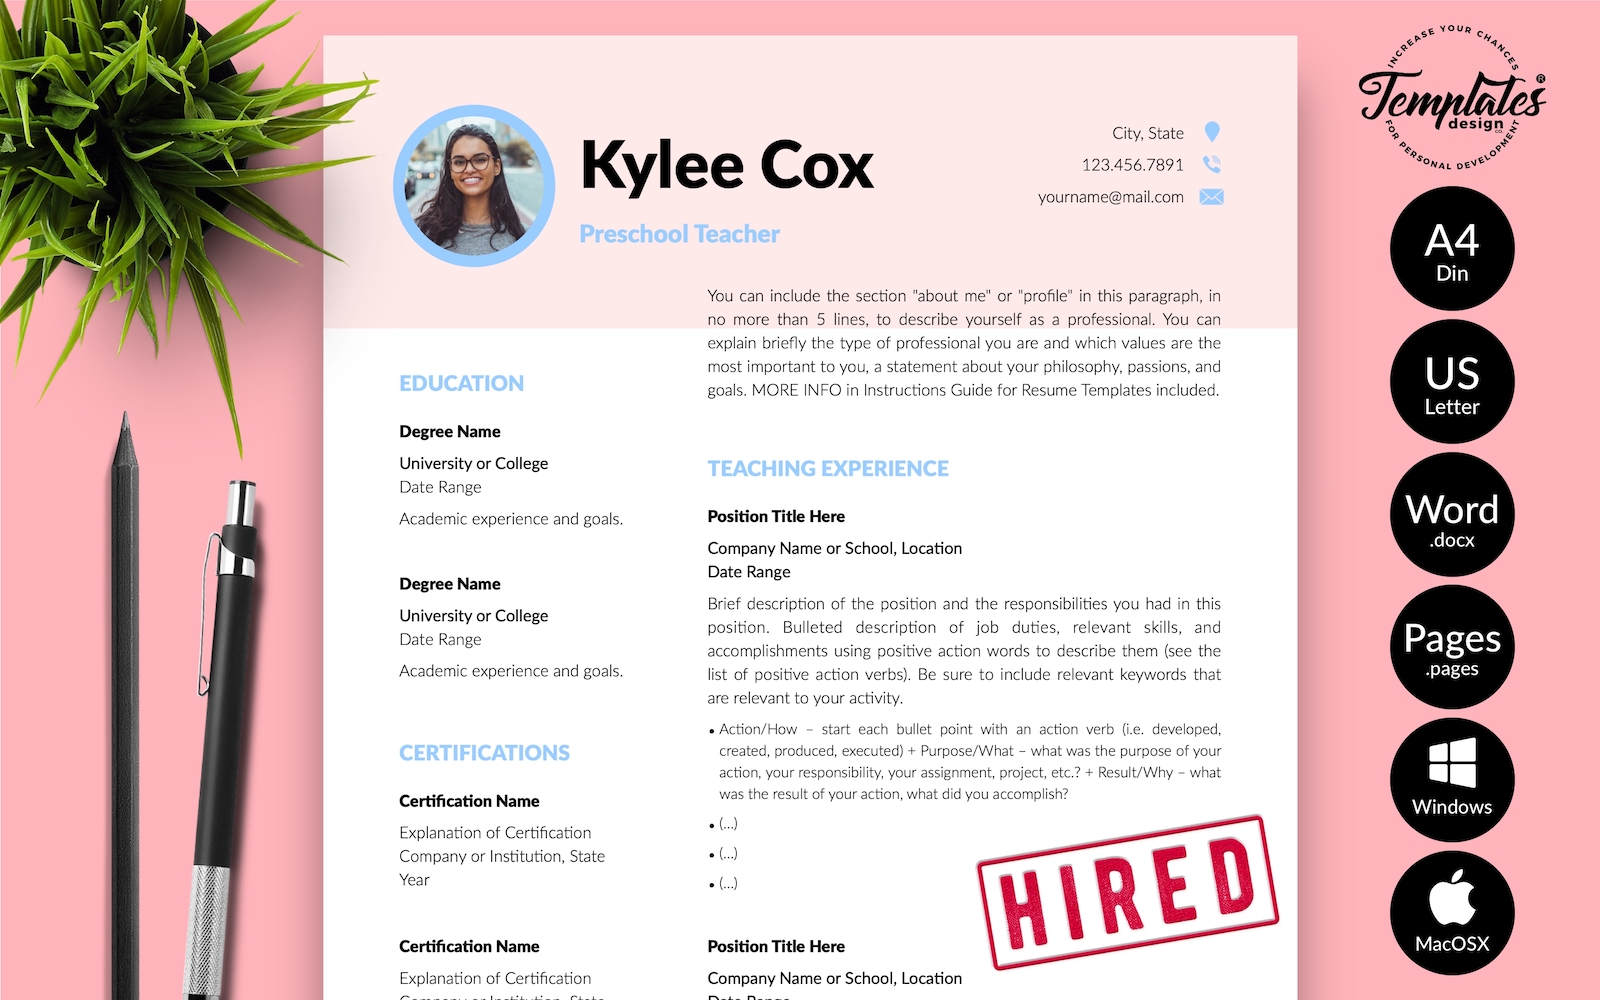 Kylie Cox - Teacher CV Resume Template with Cover Letter for Microsoft Word & iWork Pages